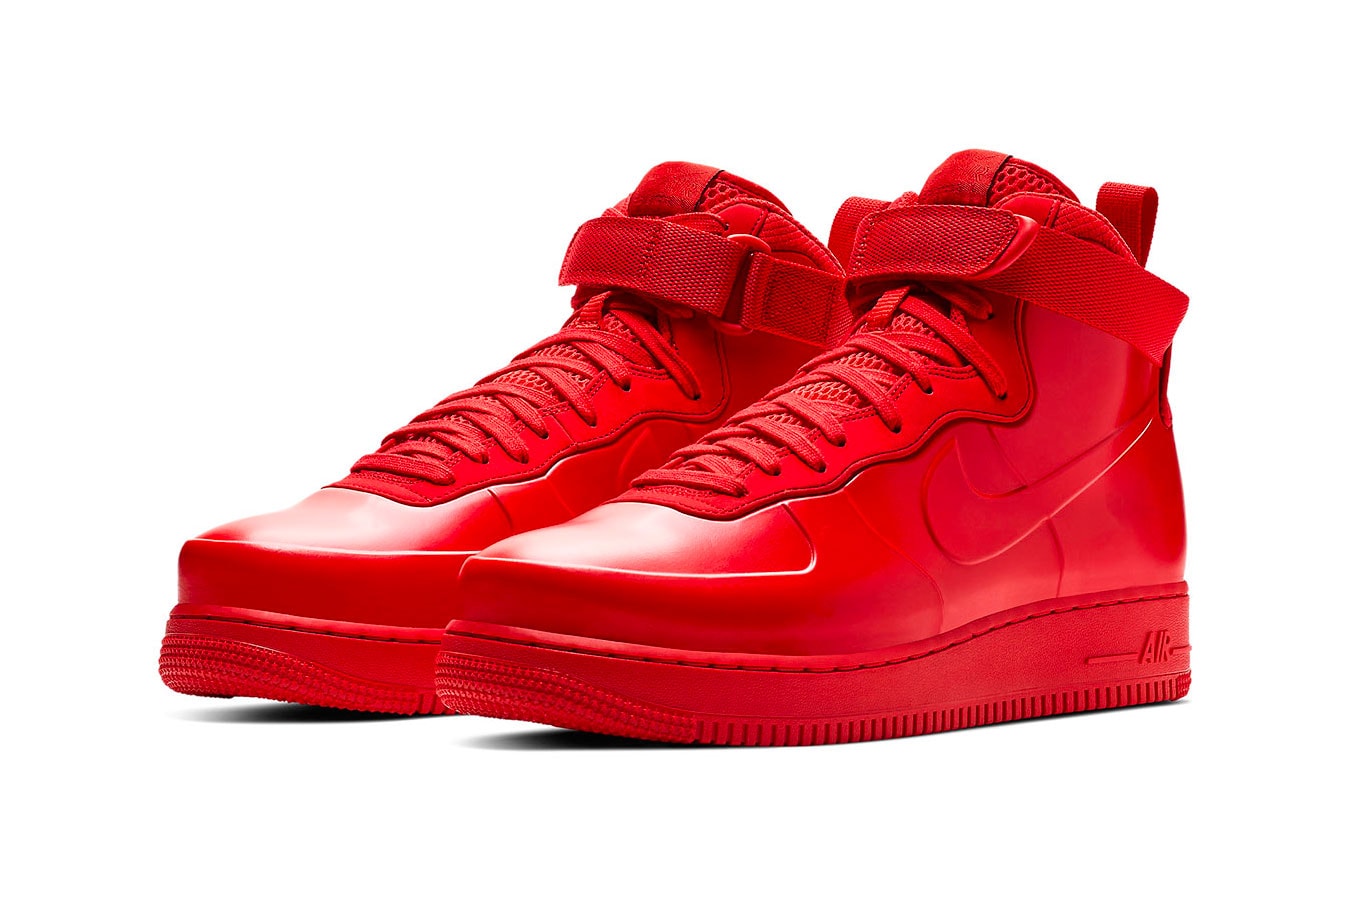 Nike Air Force 1 Foamposite "Red" Release Date price info sneaker colorway purchase buy online available now november 30 2018 Style Code: BV1172-600